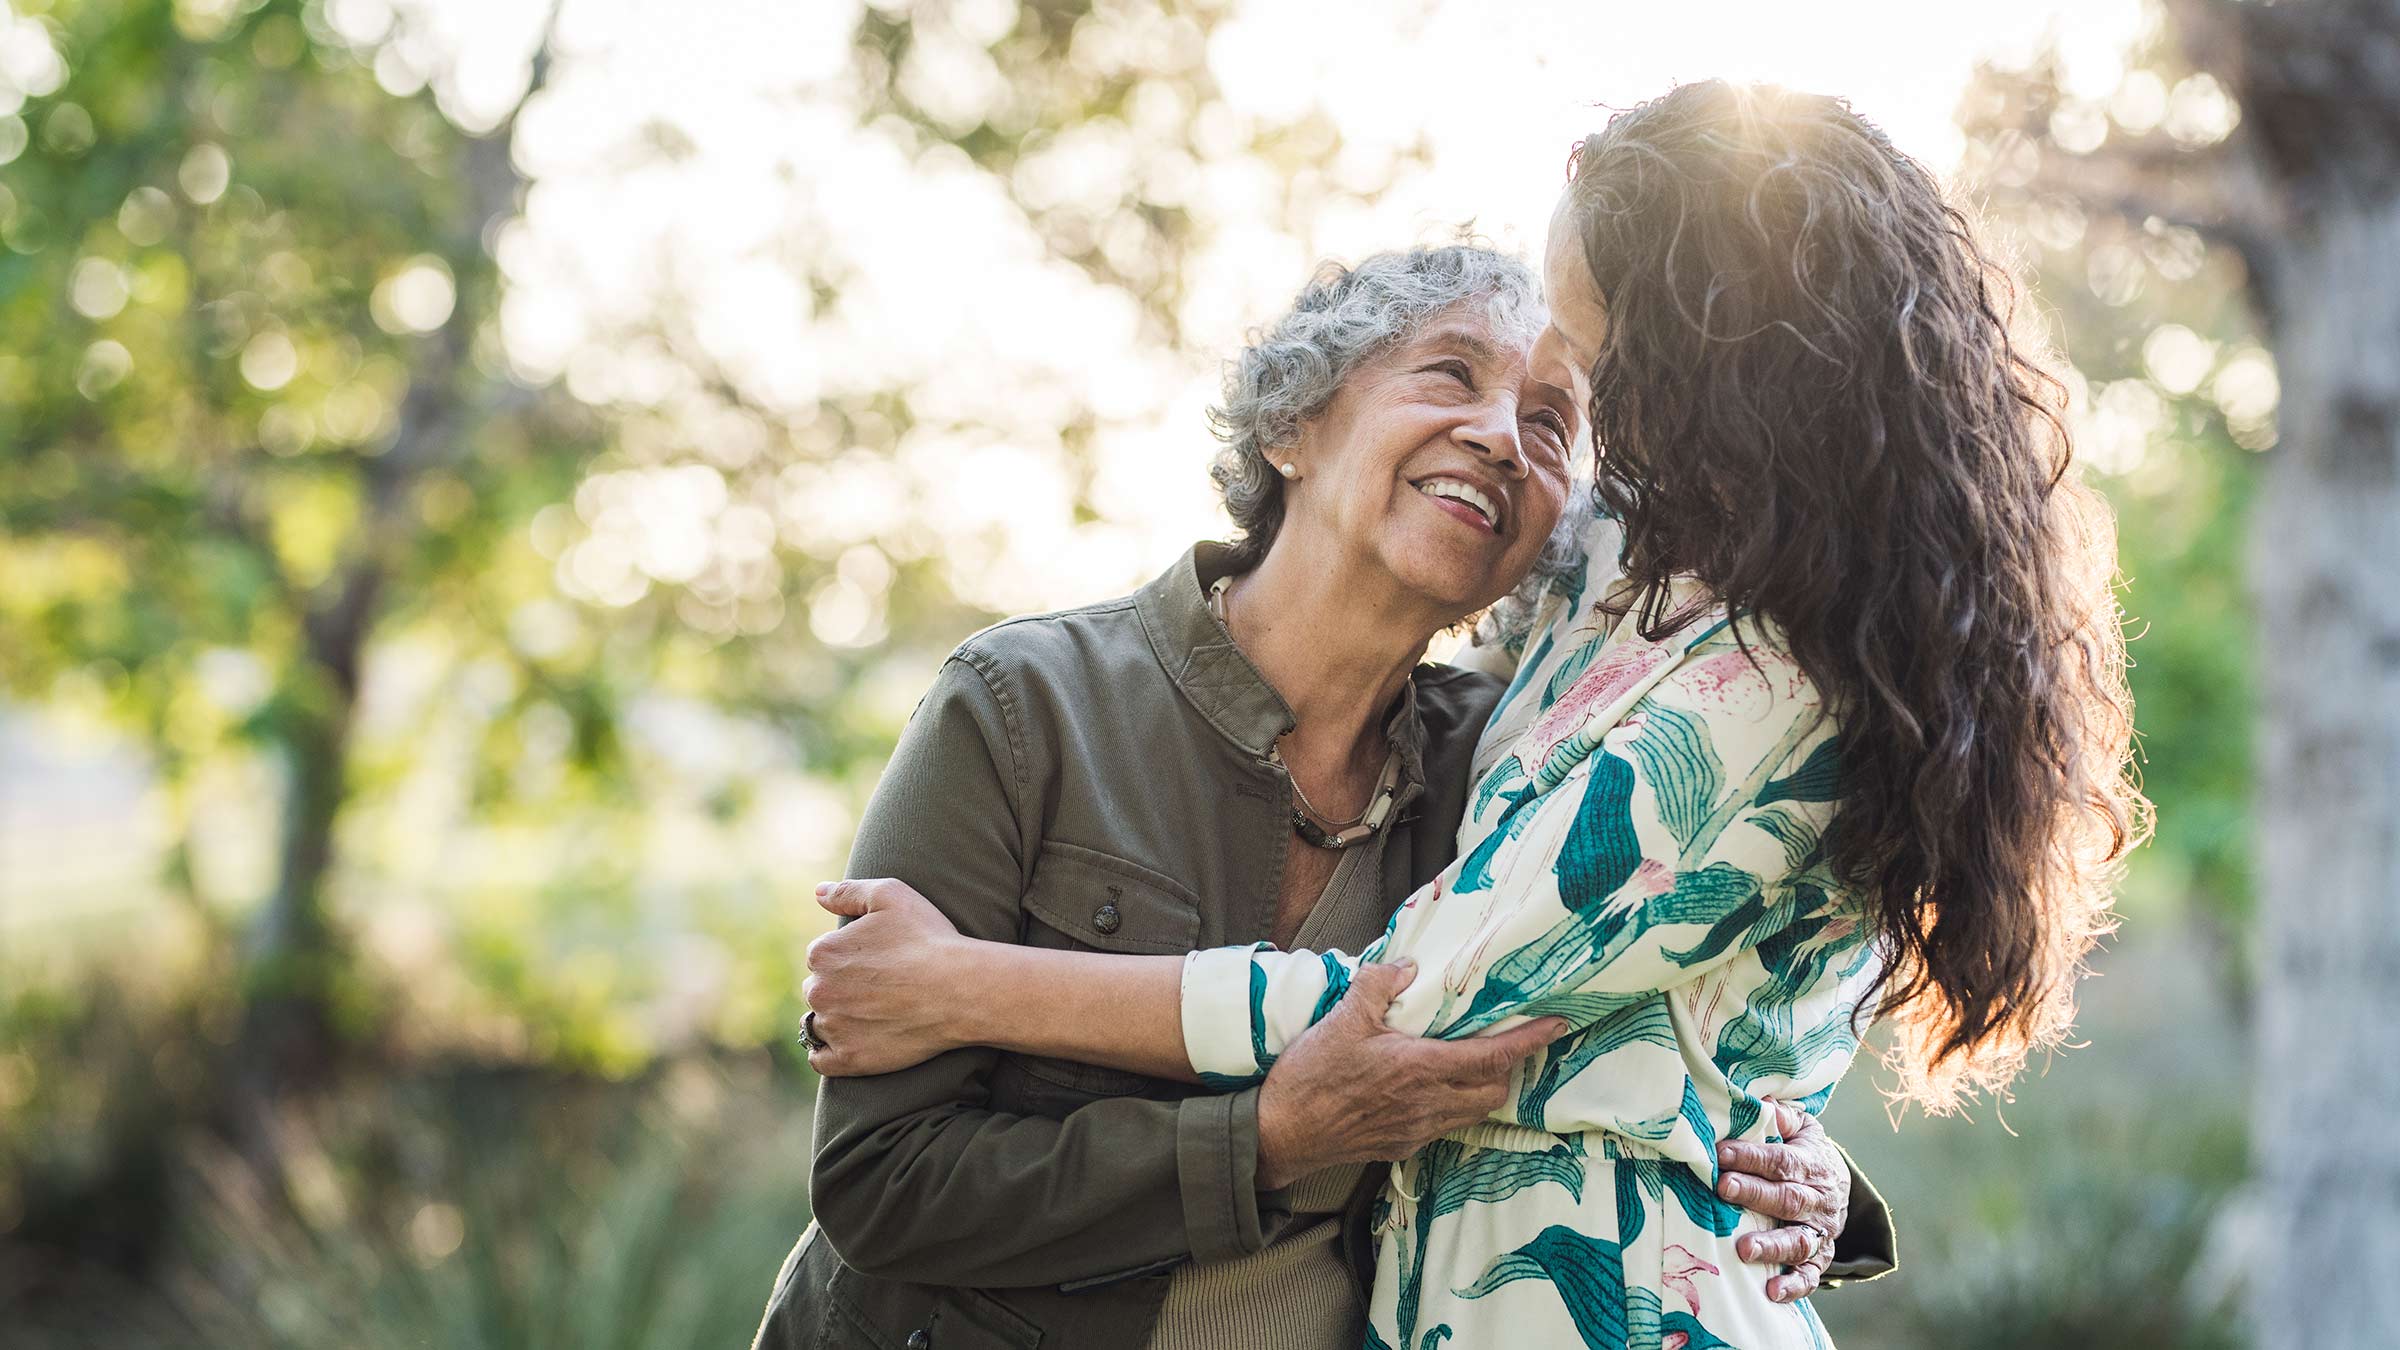 Moving a relative to assisted living: How to talk about it